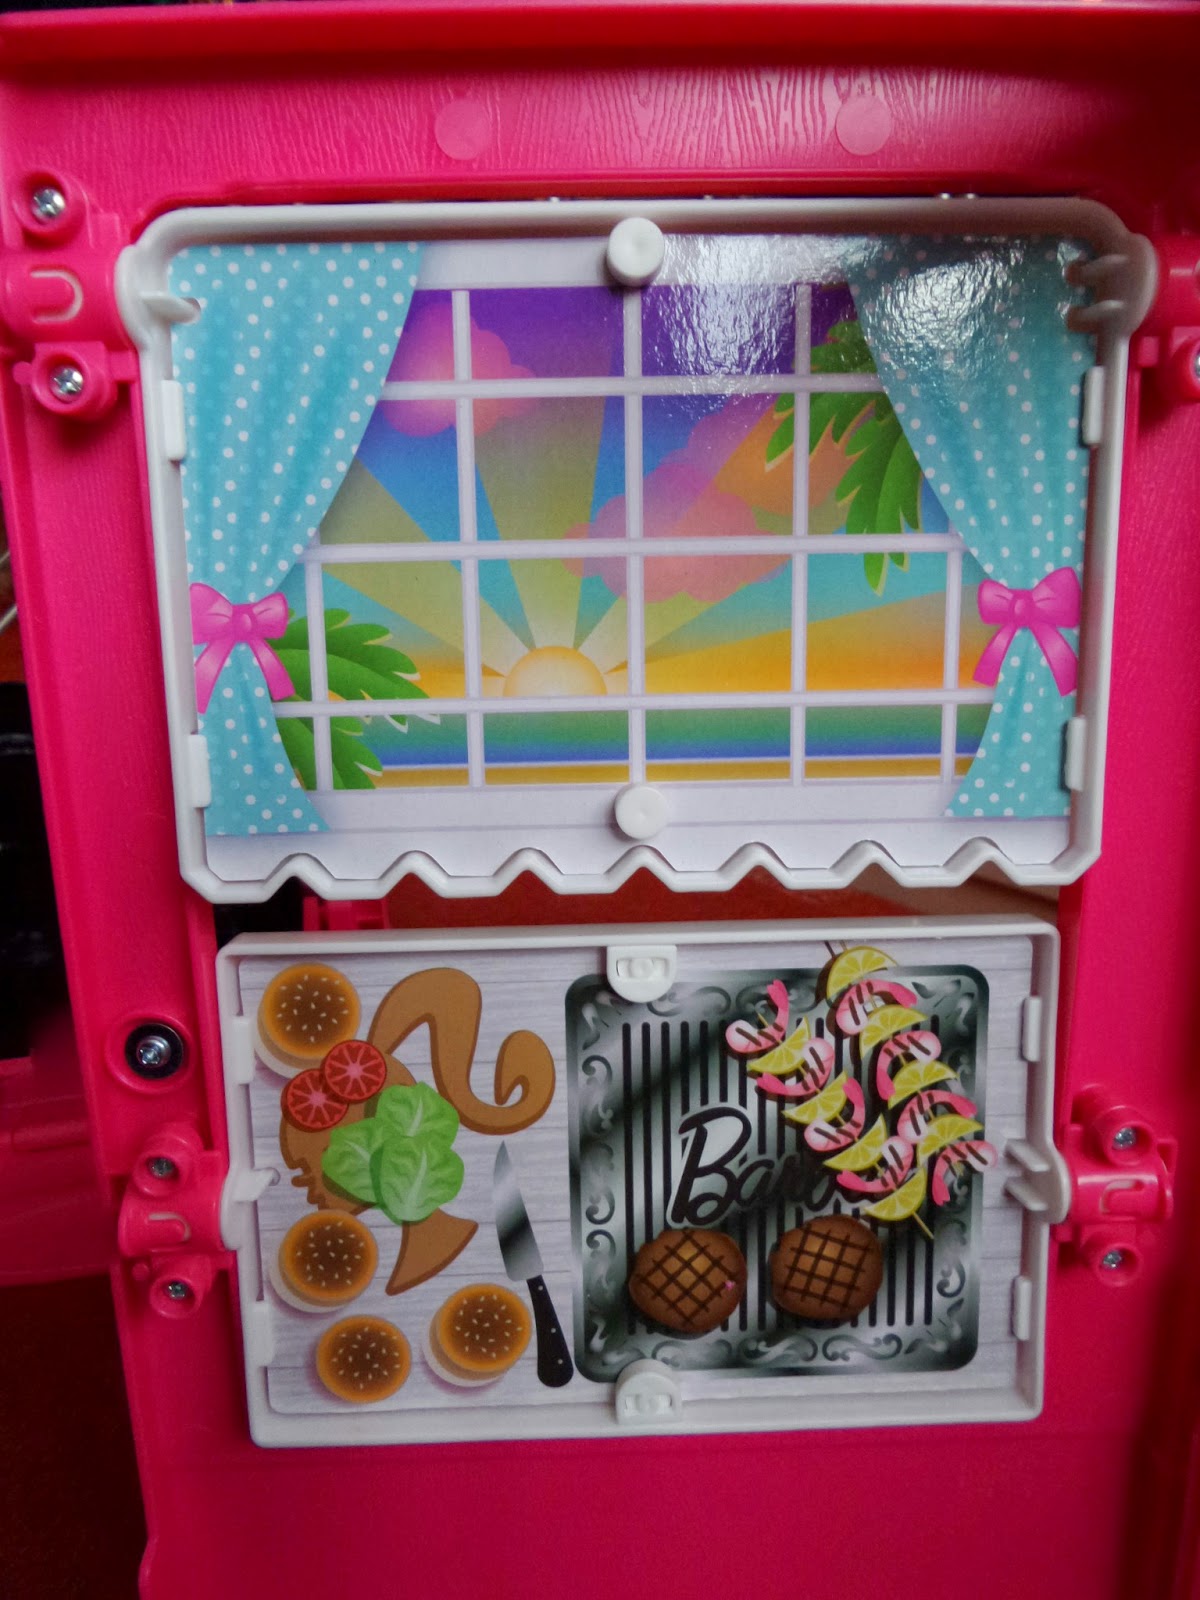 The inside back panel of the Barbie Glam Camper #Review